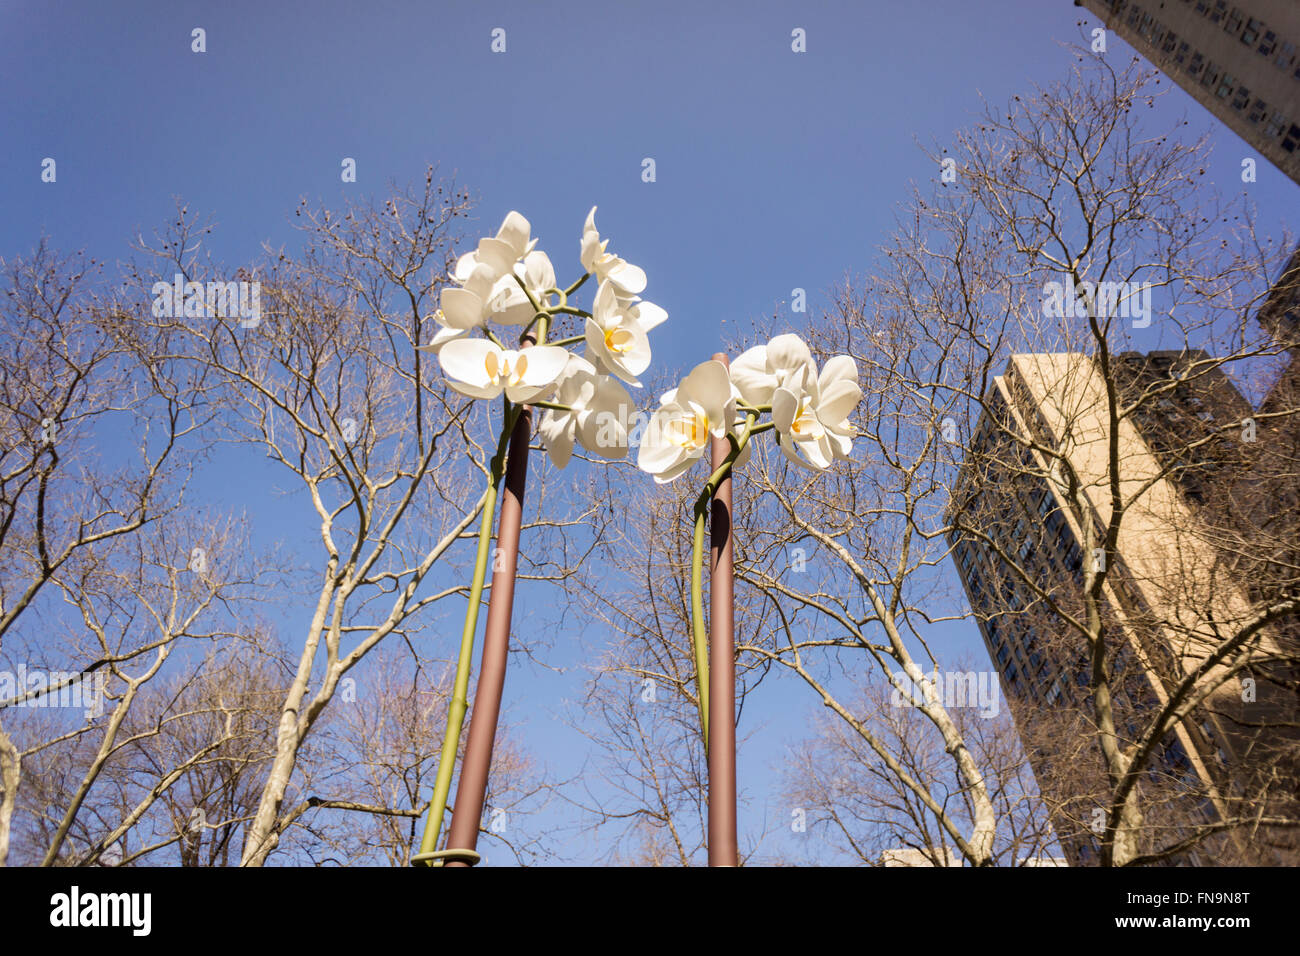 Isa Genzken's 'Two Orchids' are a harbinger of spring during its exhibit in the Doris C. Freedman Plaza of Central Park in New York on Sunday, March 6, 2016.  The 28 and 34 foot tall sculpture is constructed of stainless steel. The exhibition is sponsored by the Public Art Fund and will be on view until August 21, 2016.  (© Richard B. Levine) Stock Photo